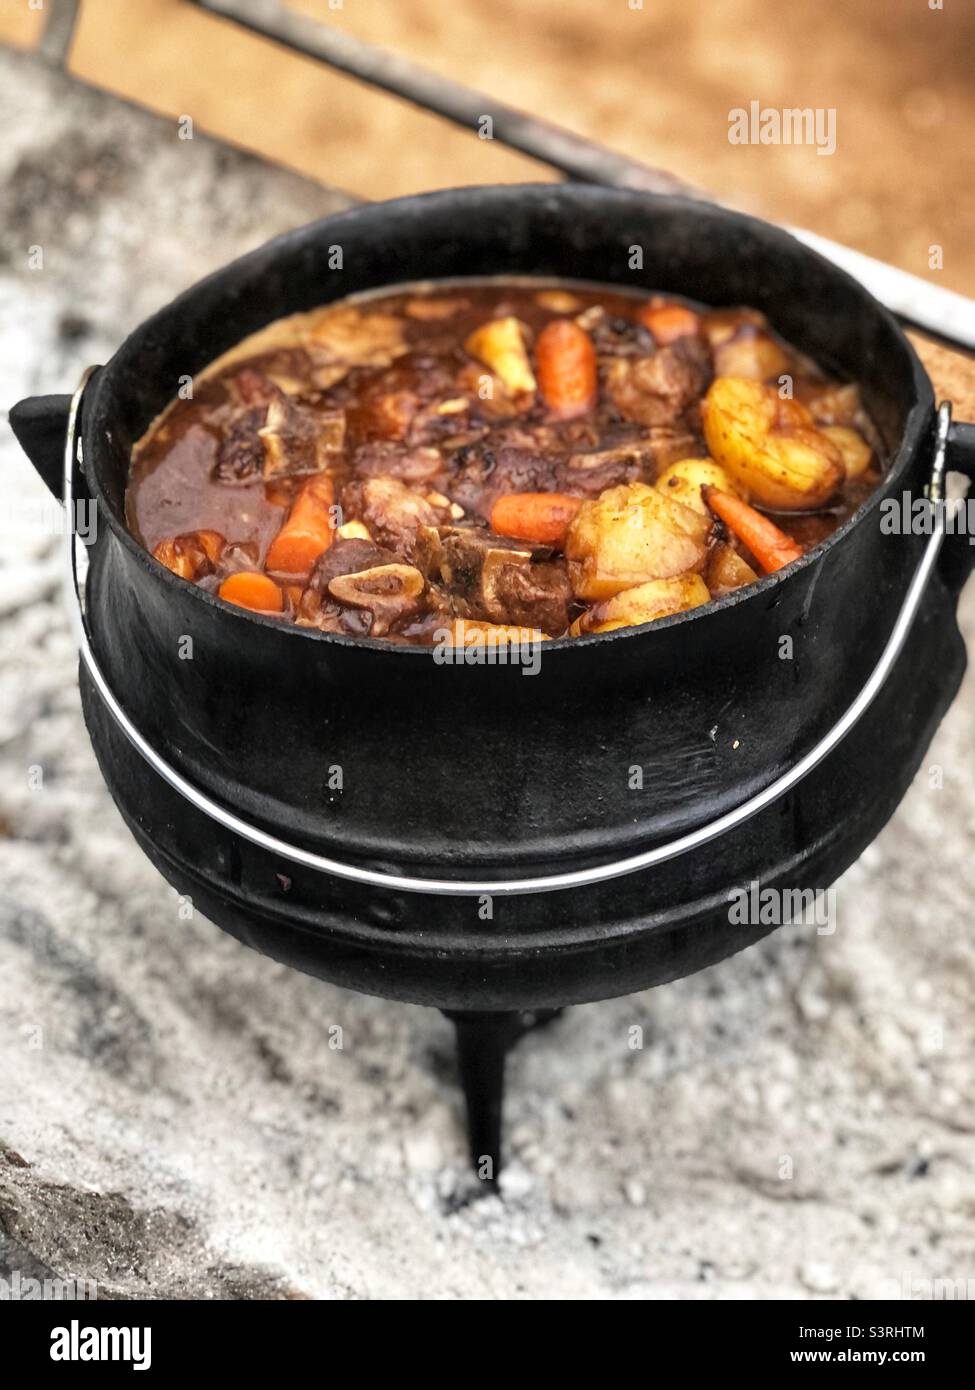 A traditional South African dish called a potjie which is like a